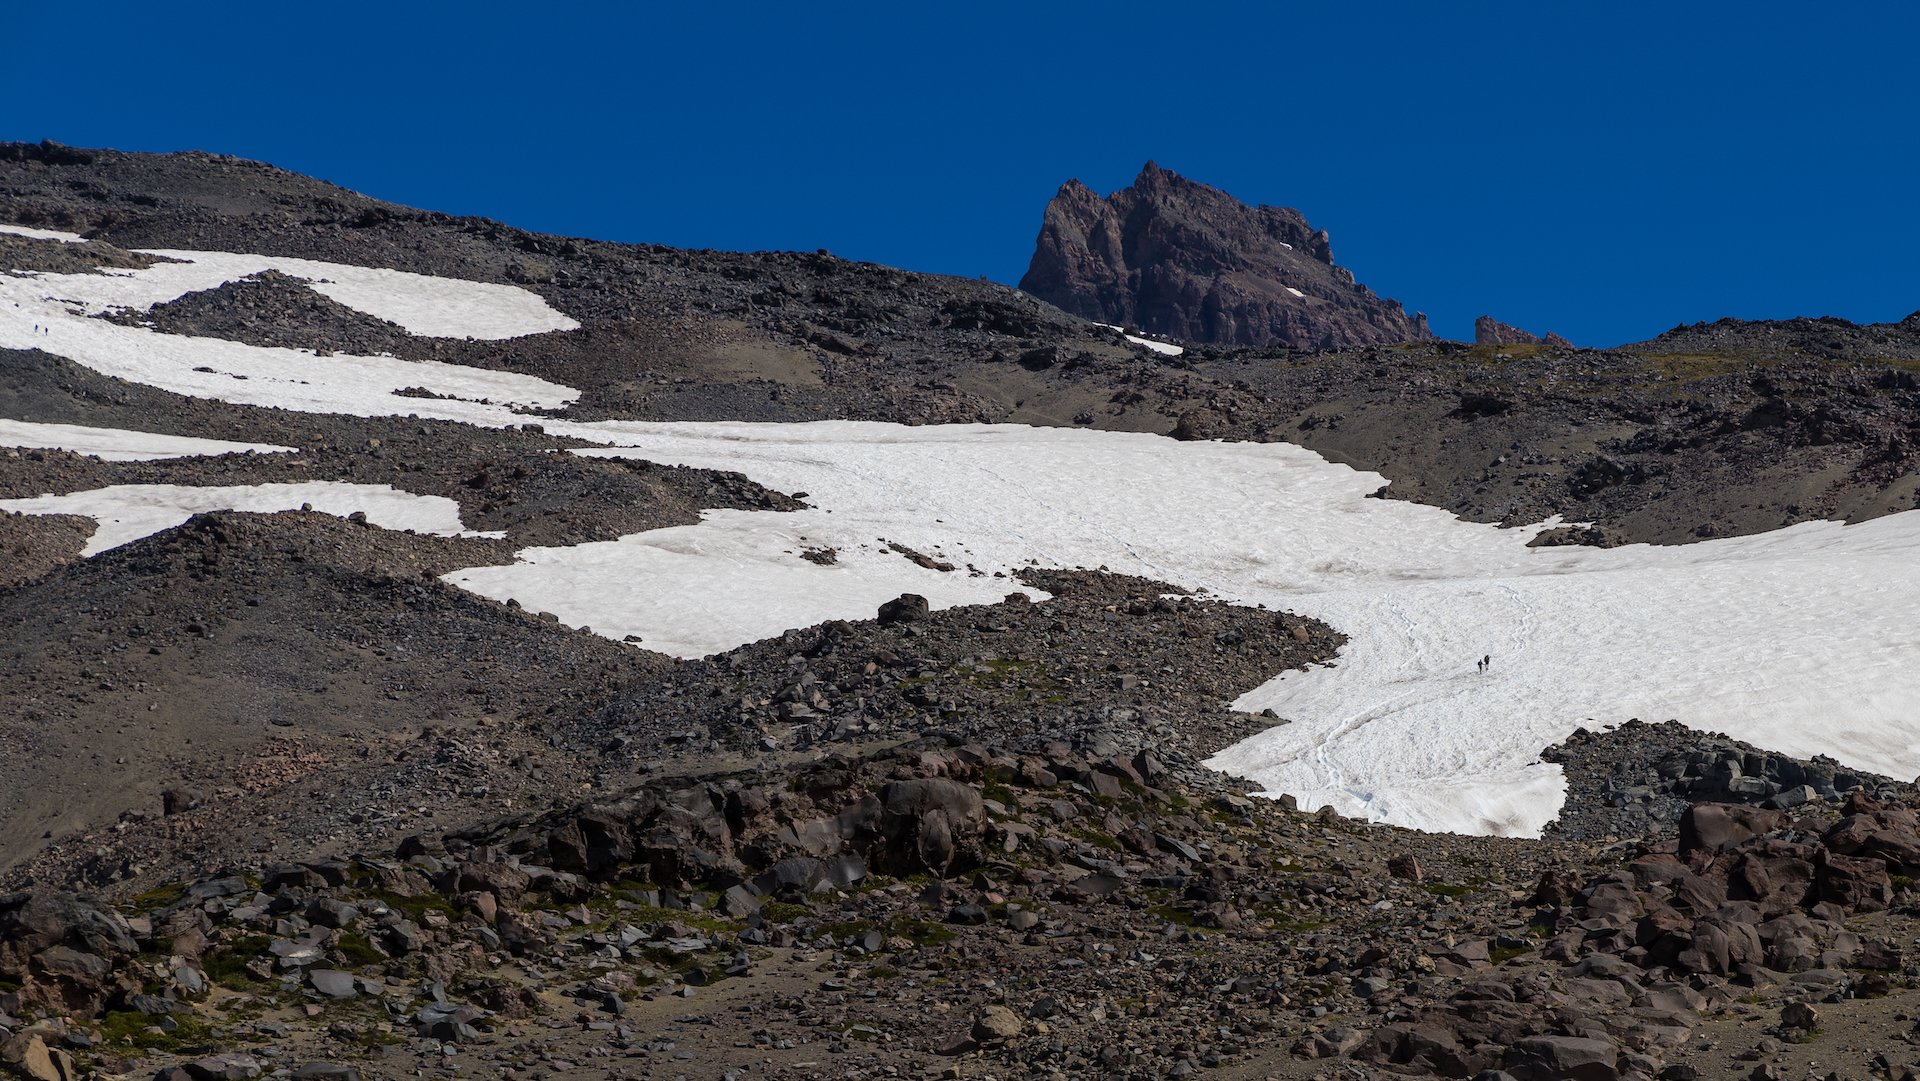  Looking up, we can see the very tiny hikers on the snow field, hiking up to Camp Muir, the staging area for summit ascents.  